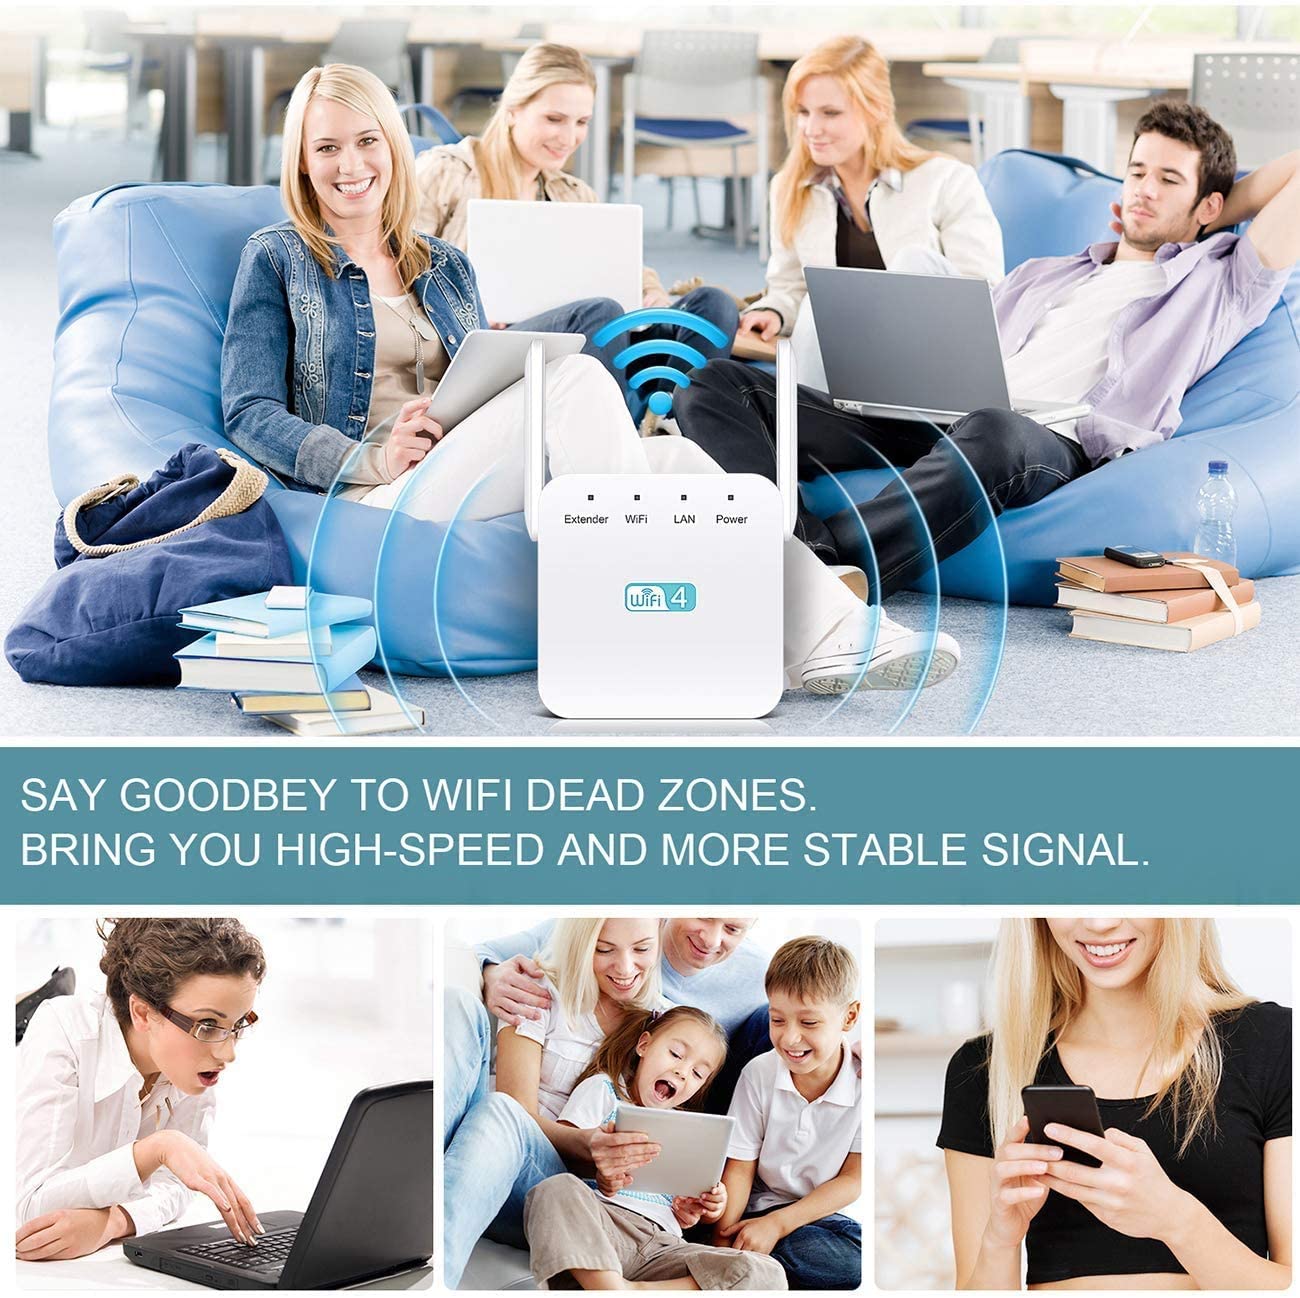 EDUPUP WiFi Extender, WiFi Range Booster, Wireless Range Extender with 2 External Antenna, LAN Port, 300Mbps 2.4GHz WiFi Repeater Booster Compatible with All Routers WP Smart Home